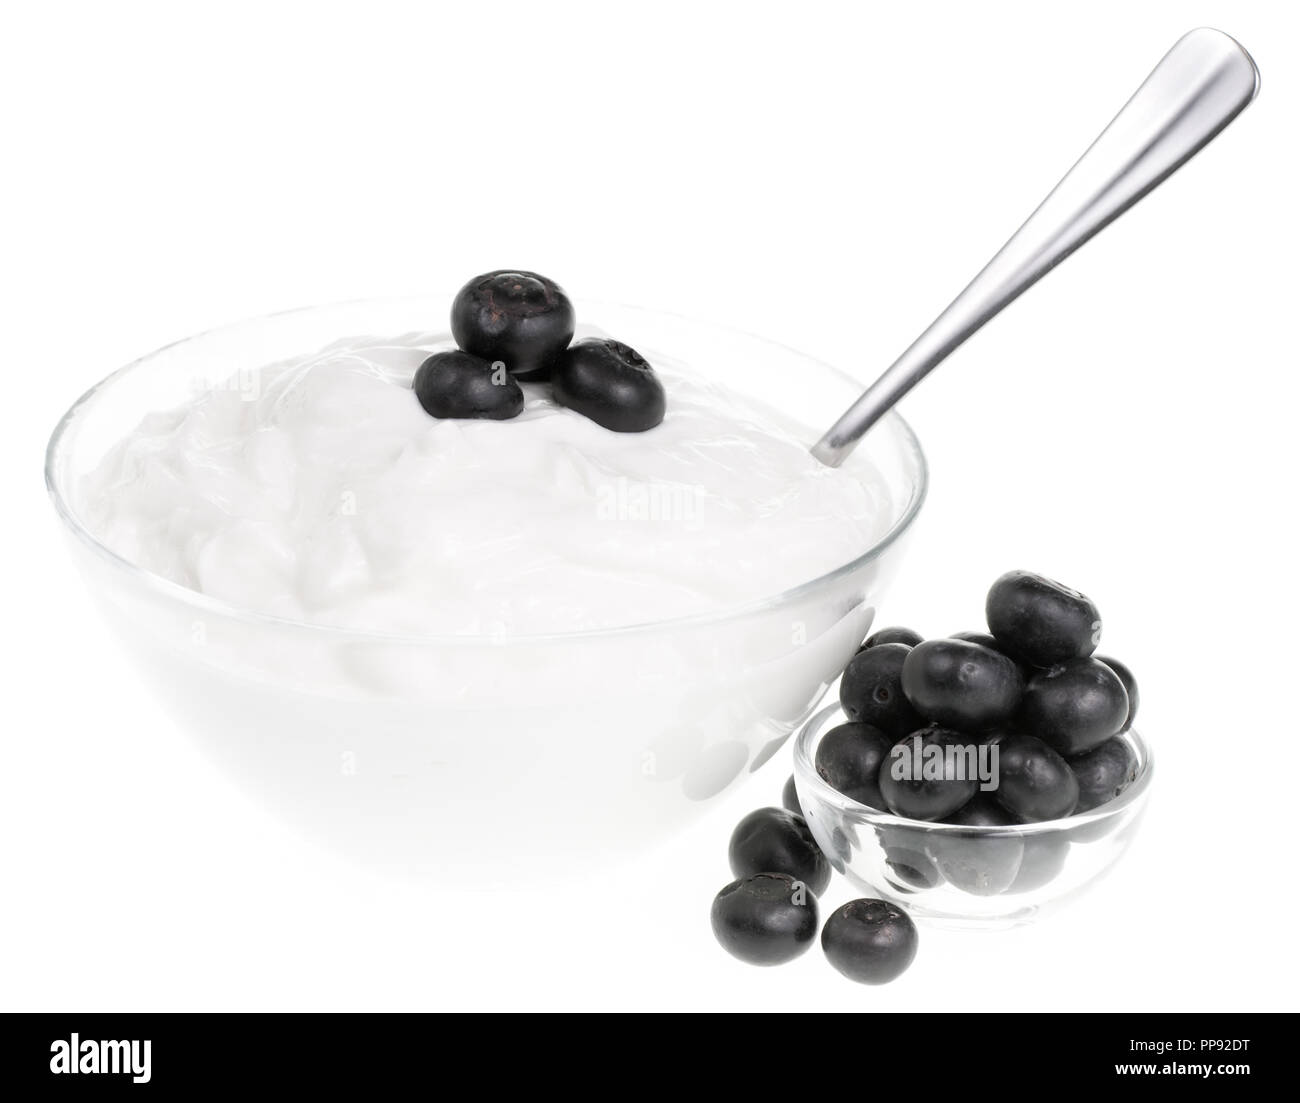 Yogurt bowl with spoon and Blueberries on white background Stock Photo